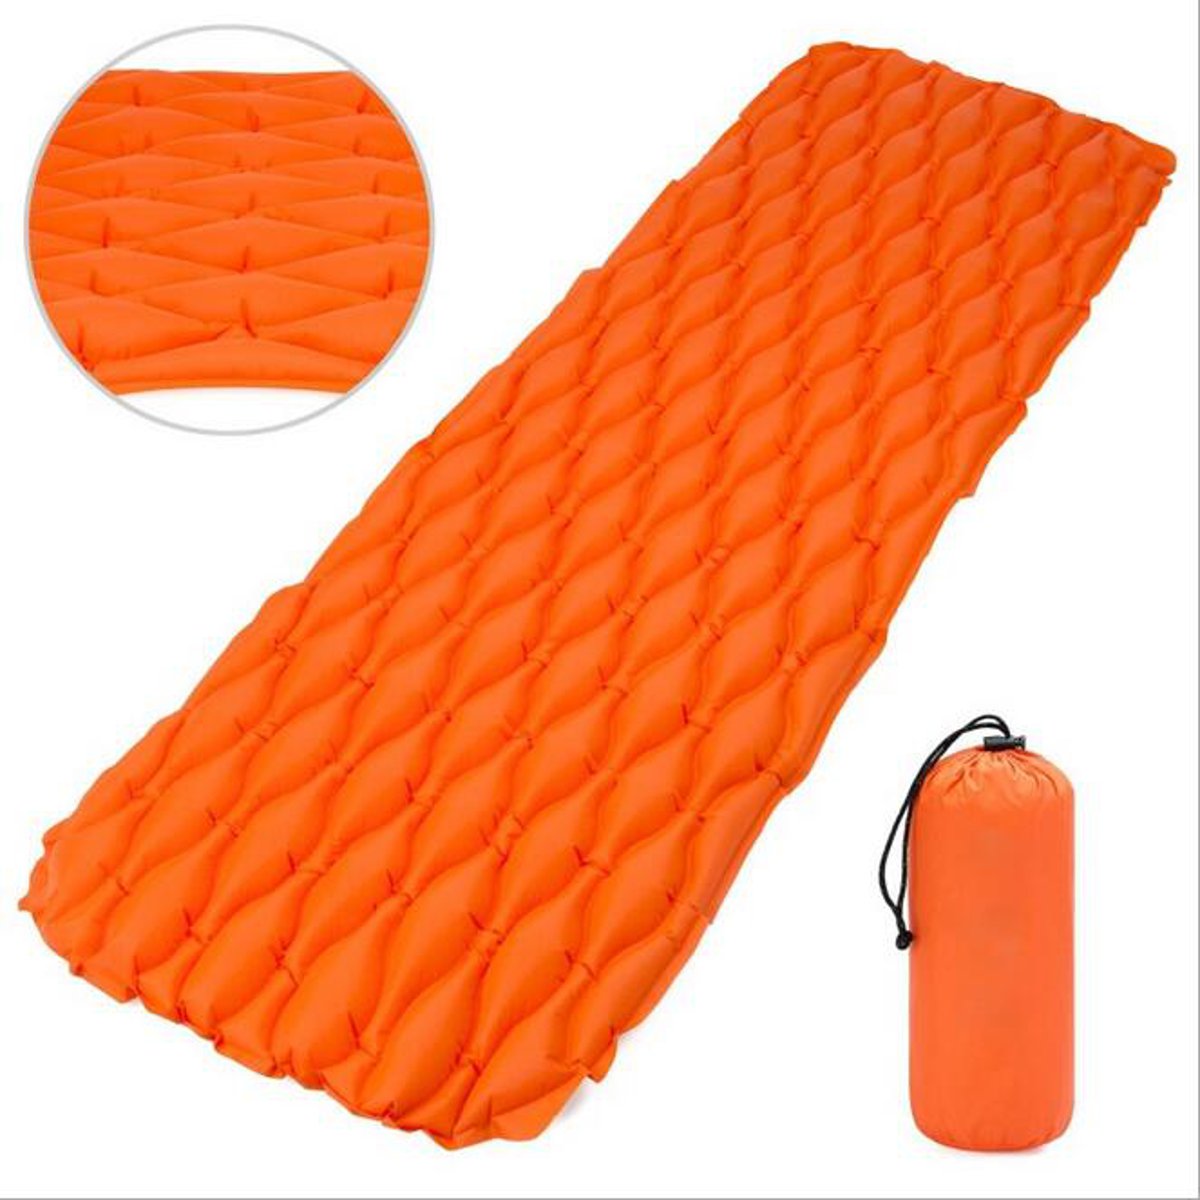 Meigar Portable Inflatable Sleeping Pad Compact Camping Backpacking Air Pad Lightweight Sleeping Mat Portable Hiking Mattress - image 2 of 6